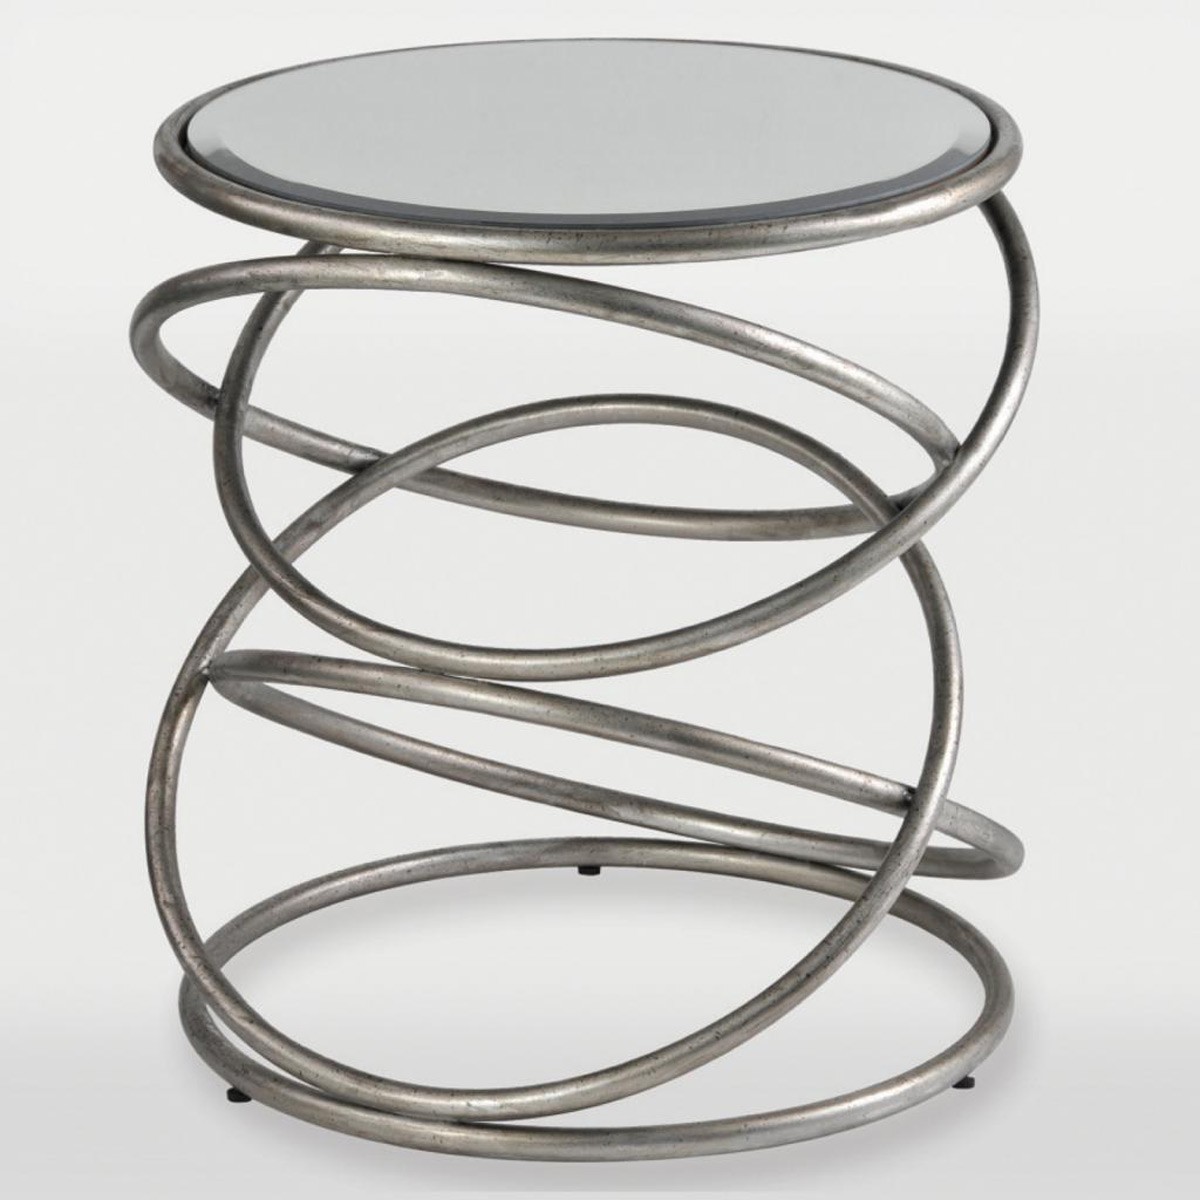 Ren-Wil Saxony Accent table - Antique silver leaf